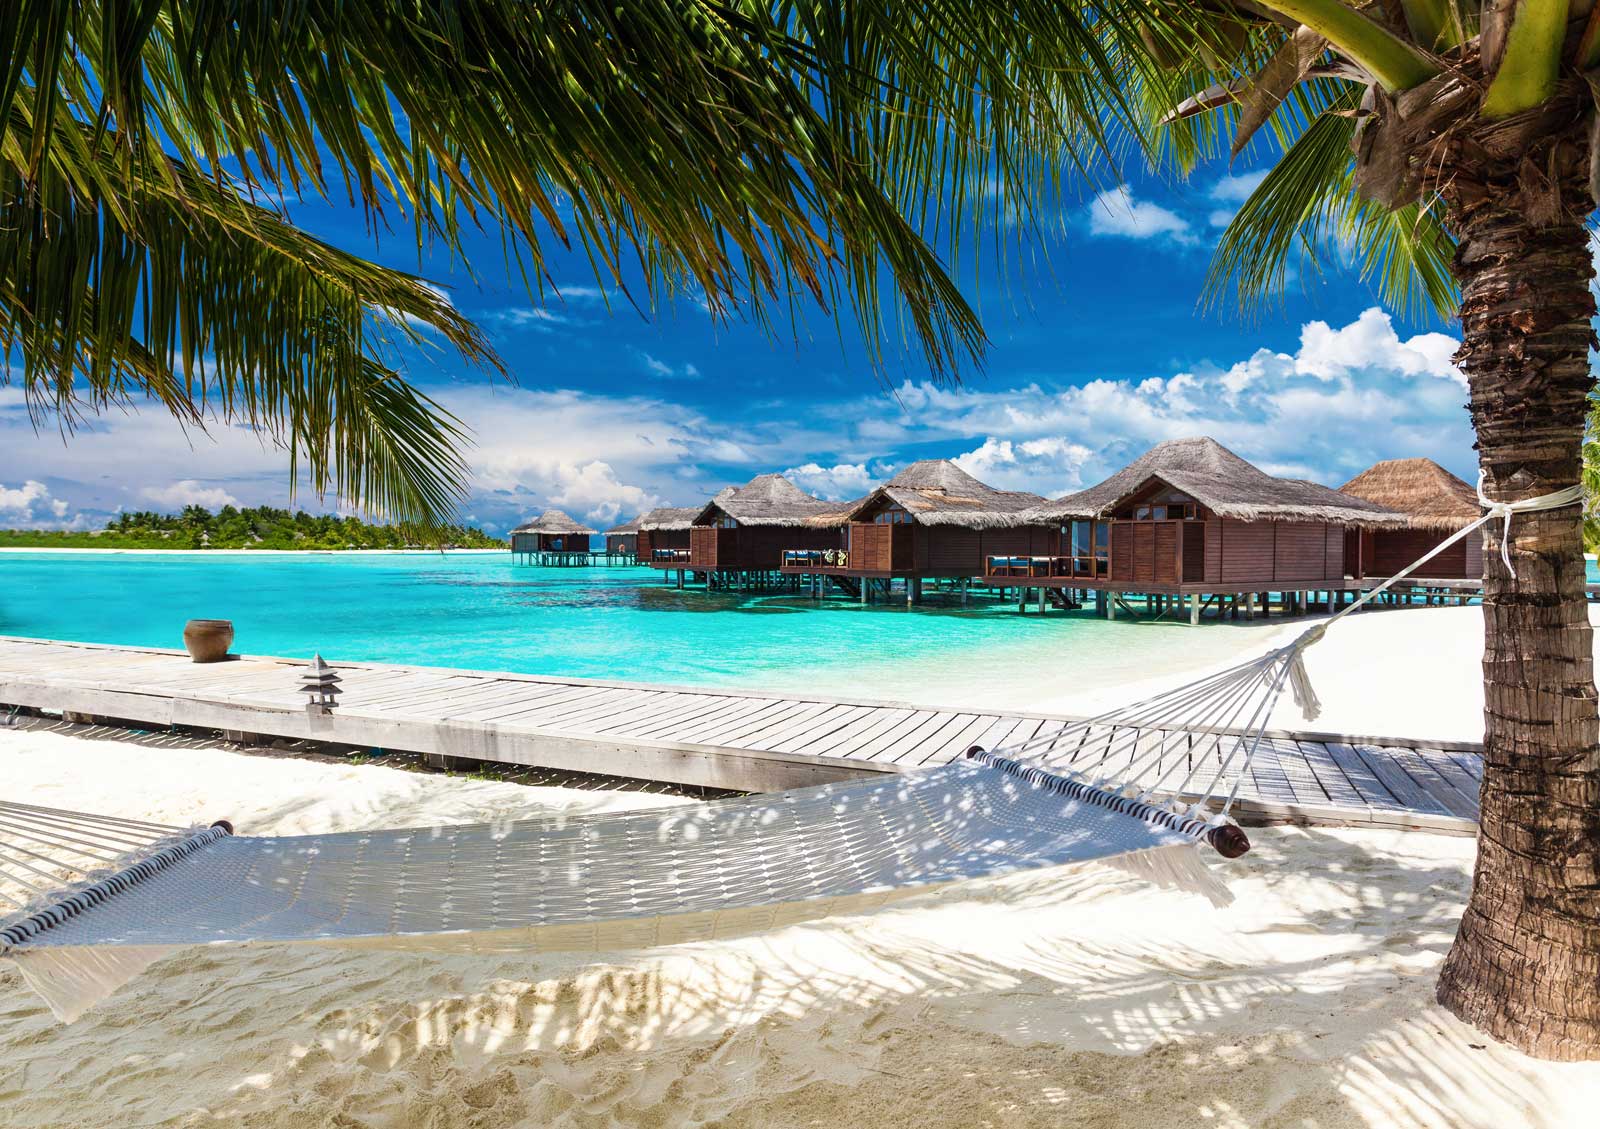 15 Best Overwater Bungalows in the Caribbean in 2023 - Travelifo